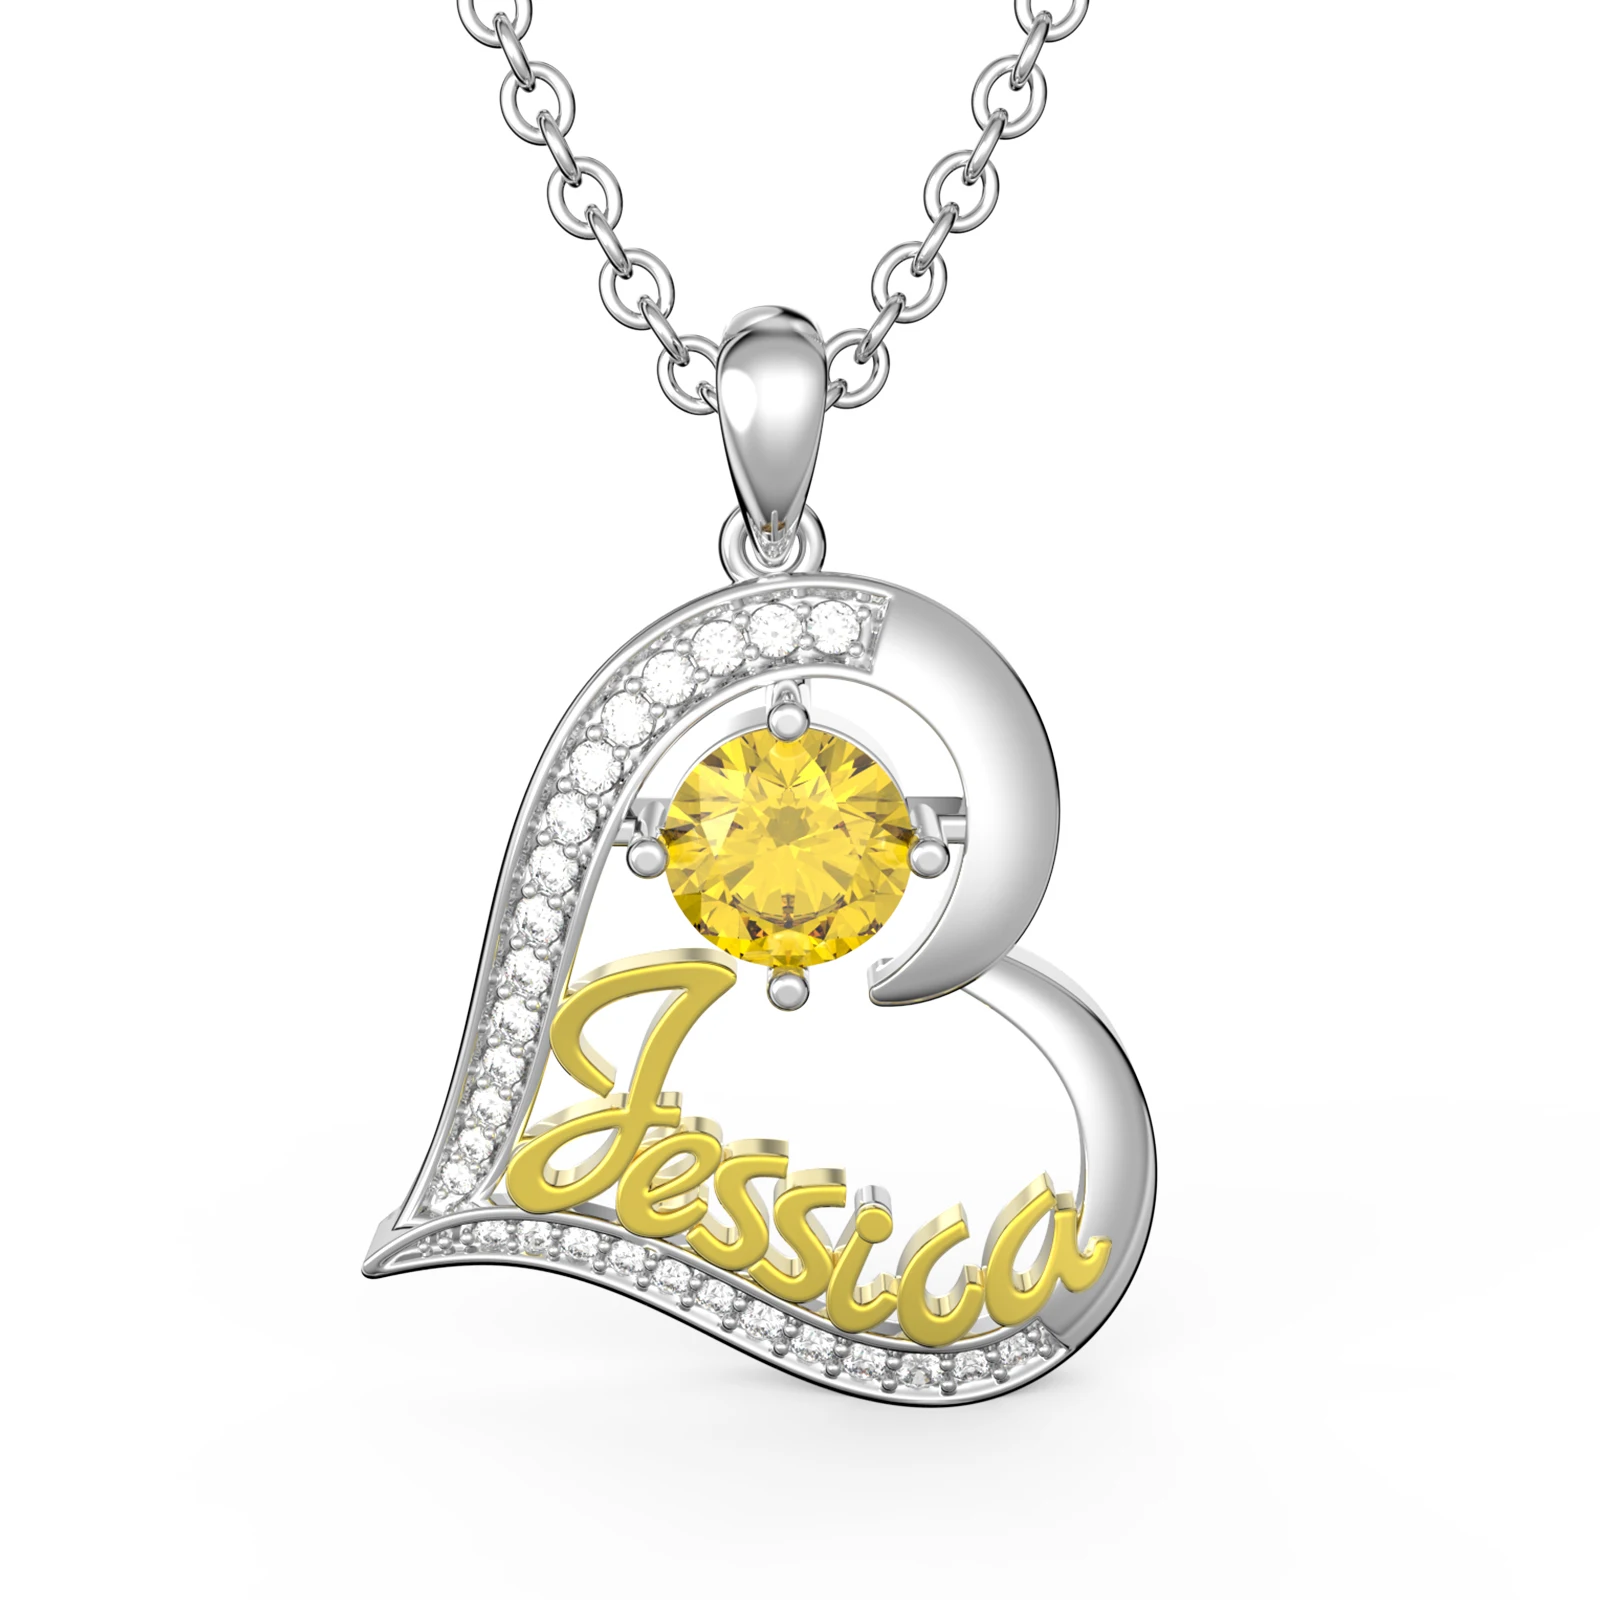 Personalized Custom Name Gold Plated Heart Pendant 3D Necklace with Birthstone